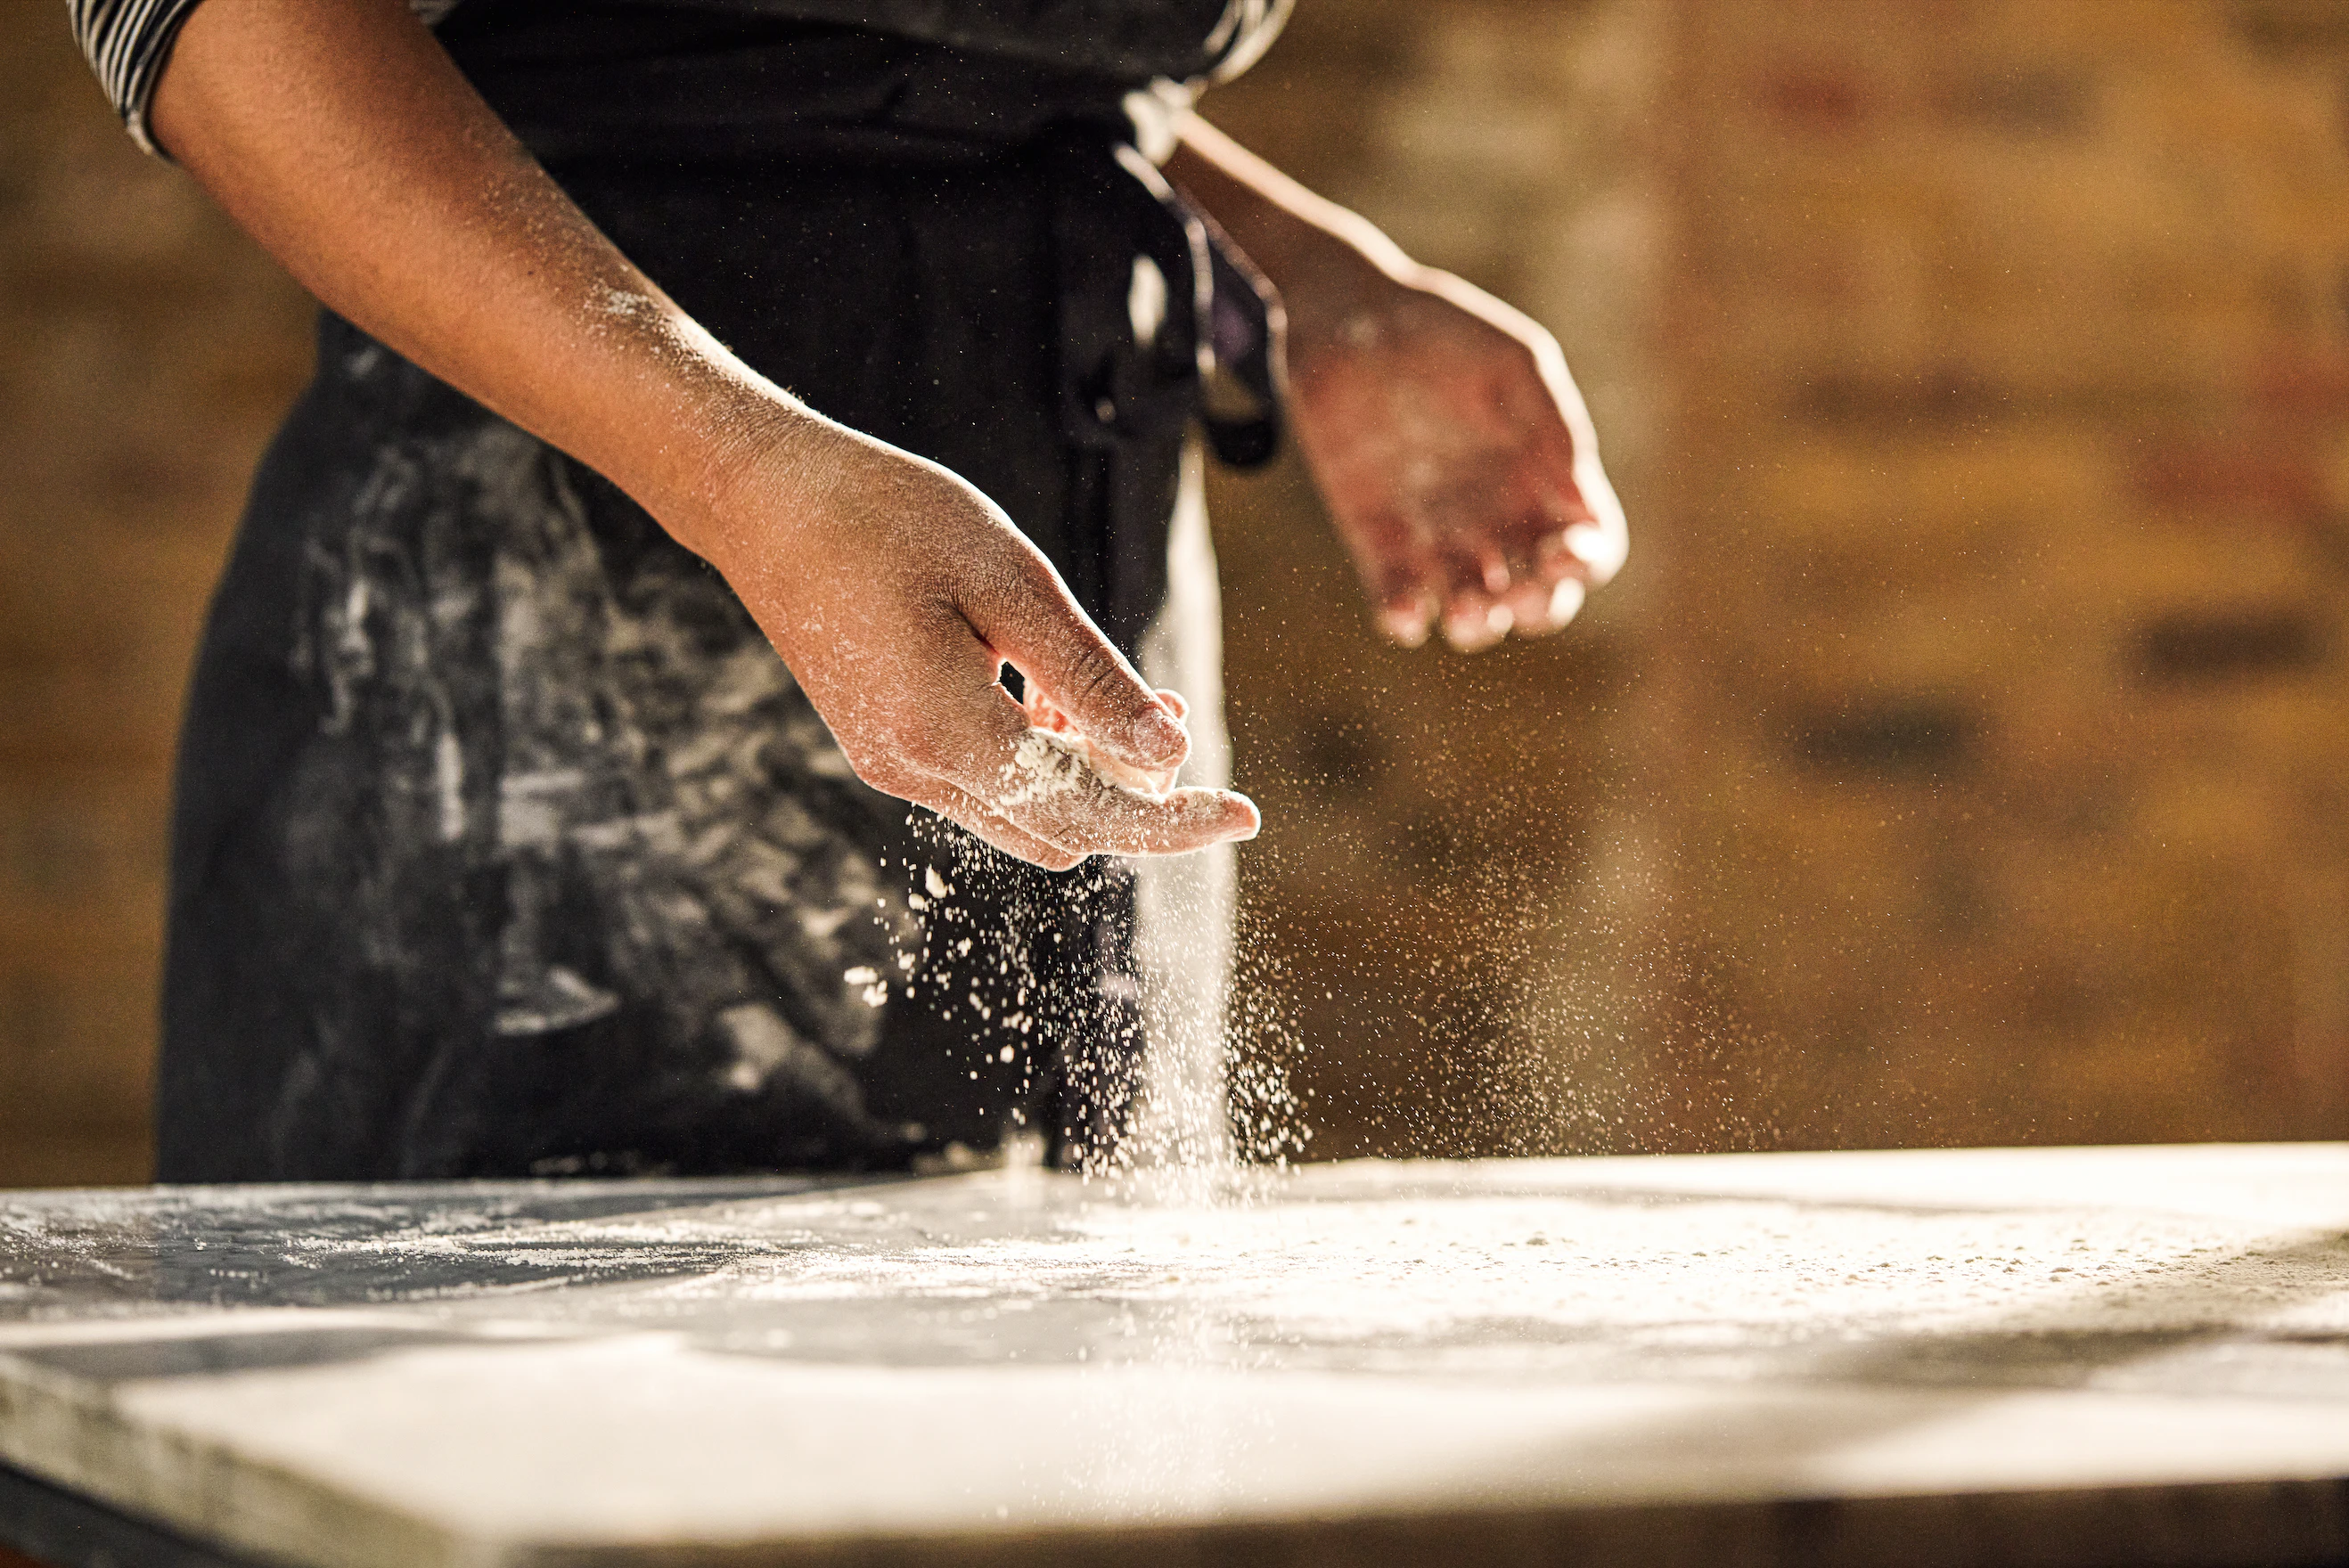 Someone wearing an apron is scattering flour over a marble surface.